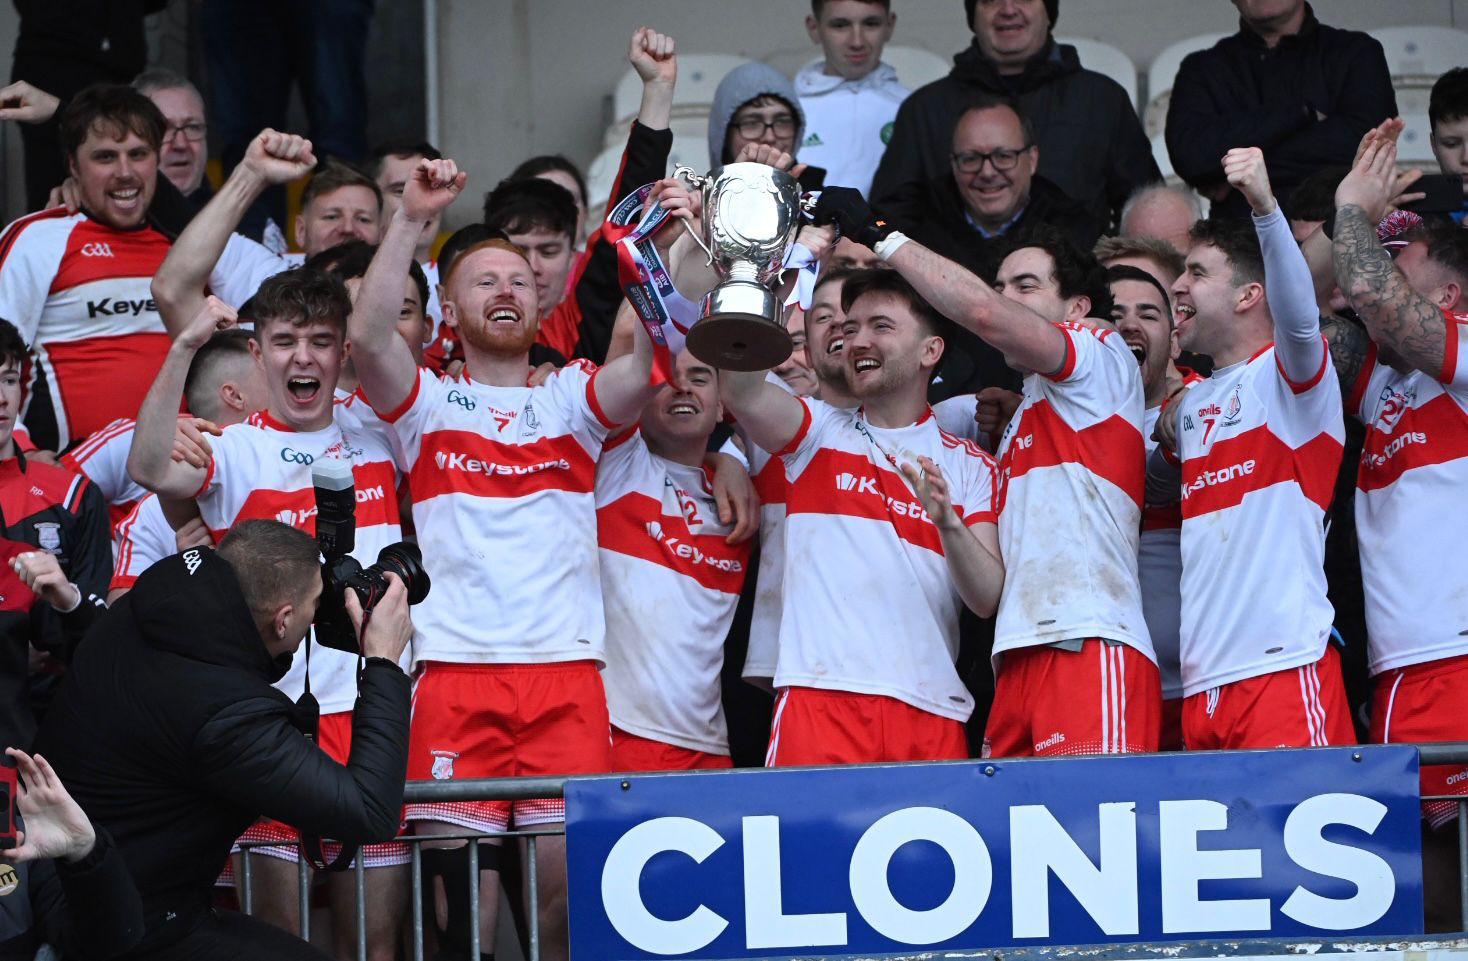 Stewartstown claim Ulster honours after dramatic penalty shootout